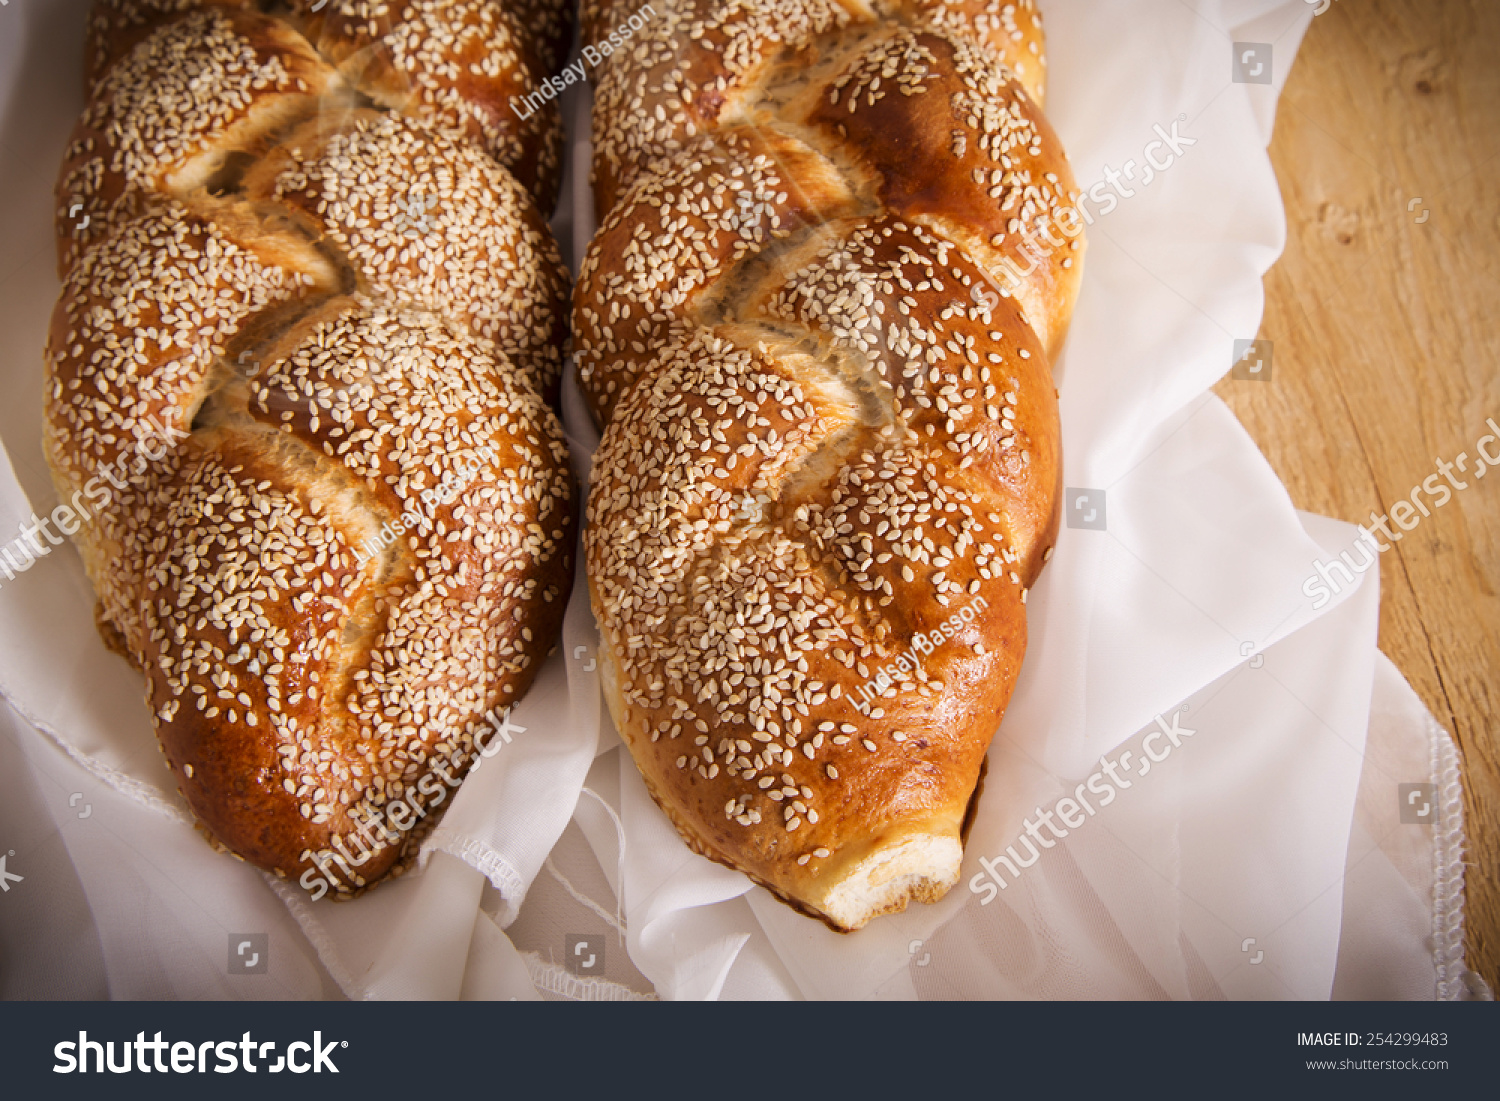 Two Loaves Seeded Challah Shabbat Stock Photo 254299483 - Shutterstock